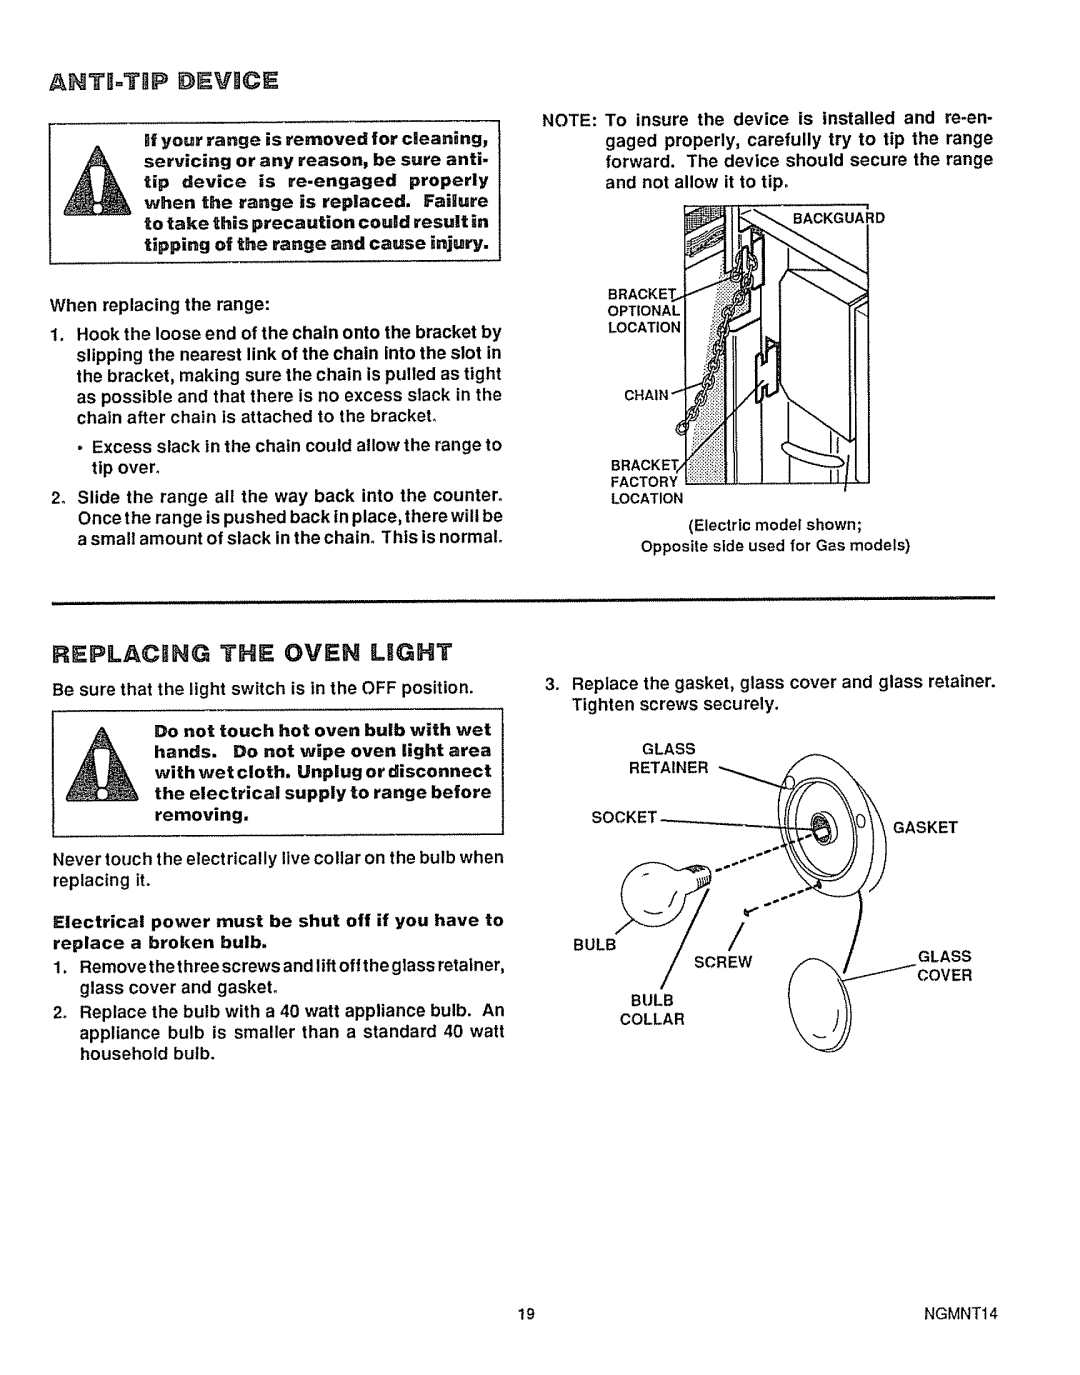 Sears 36729, 36725 warranty Antb-Tspdevice, Replaciing The Oven Light 